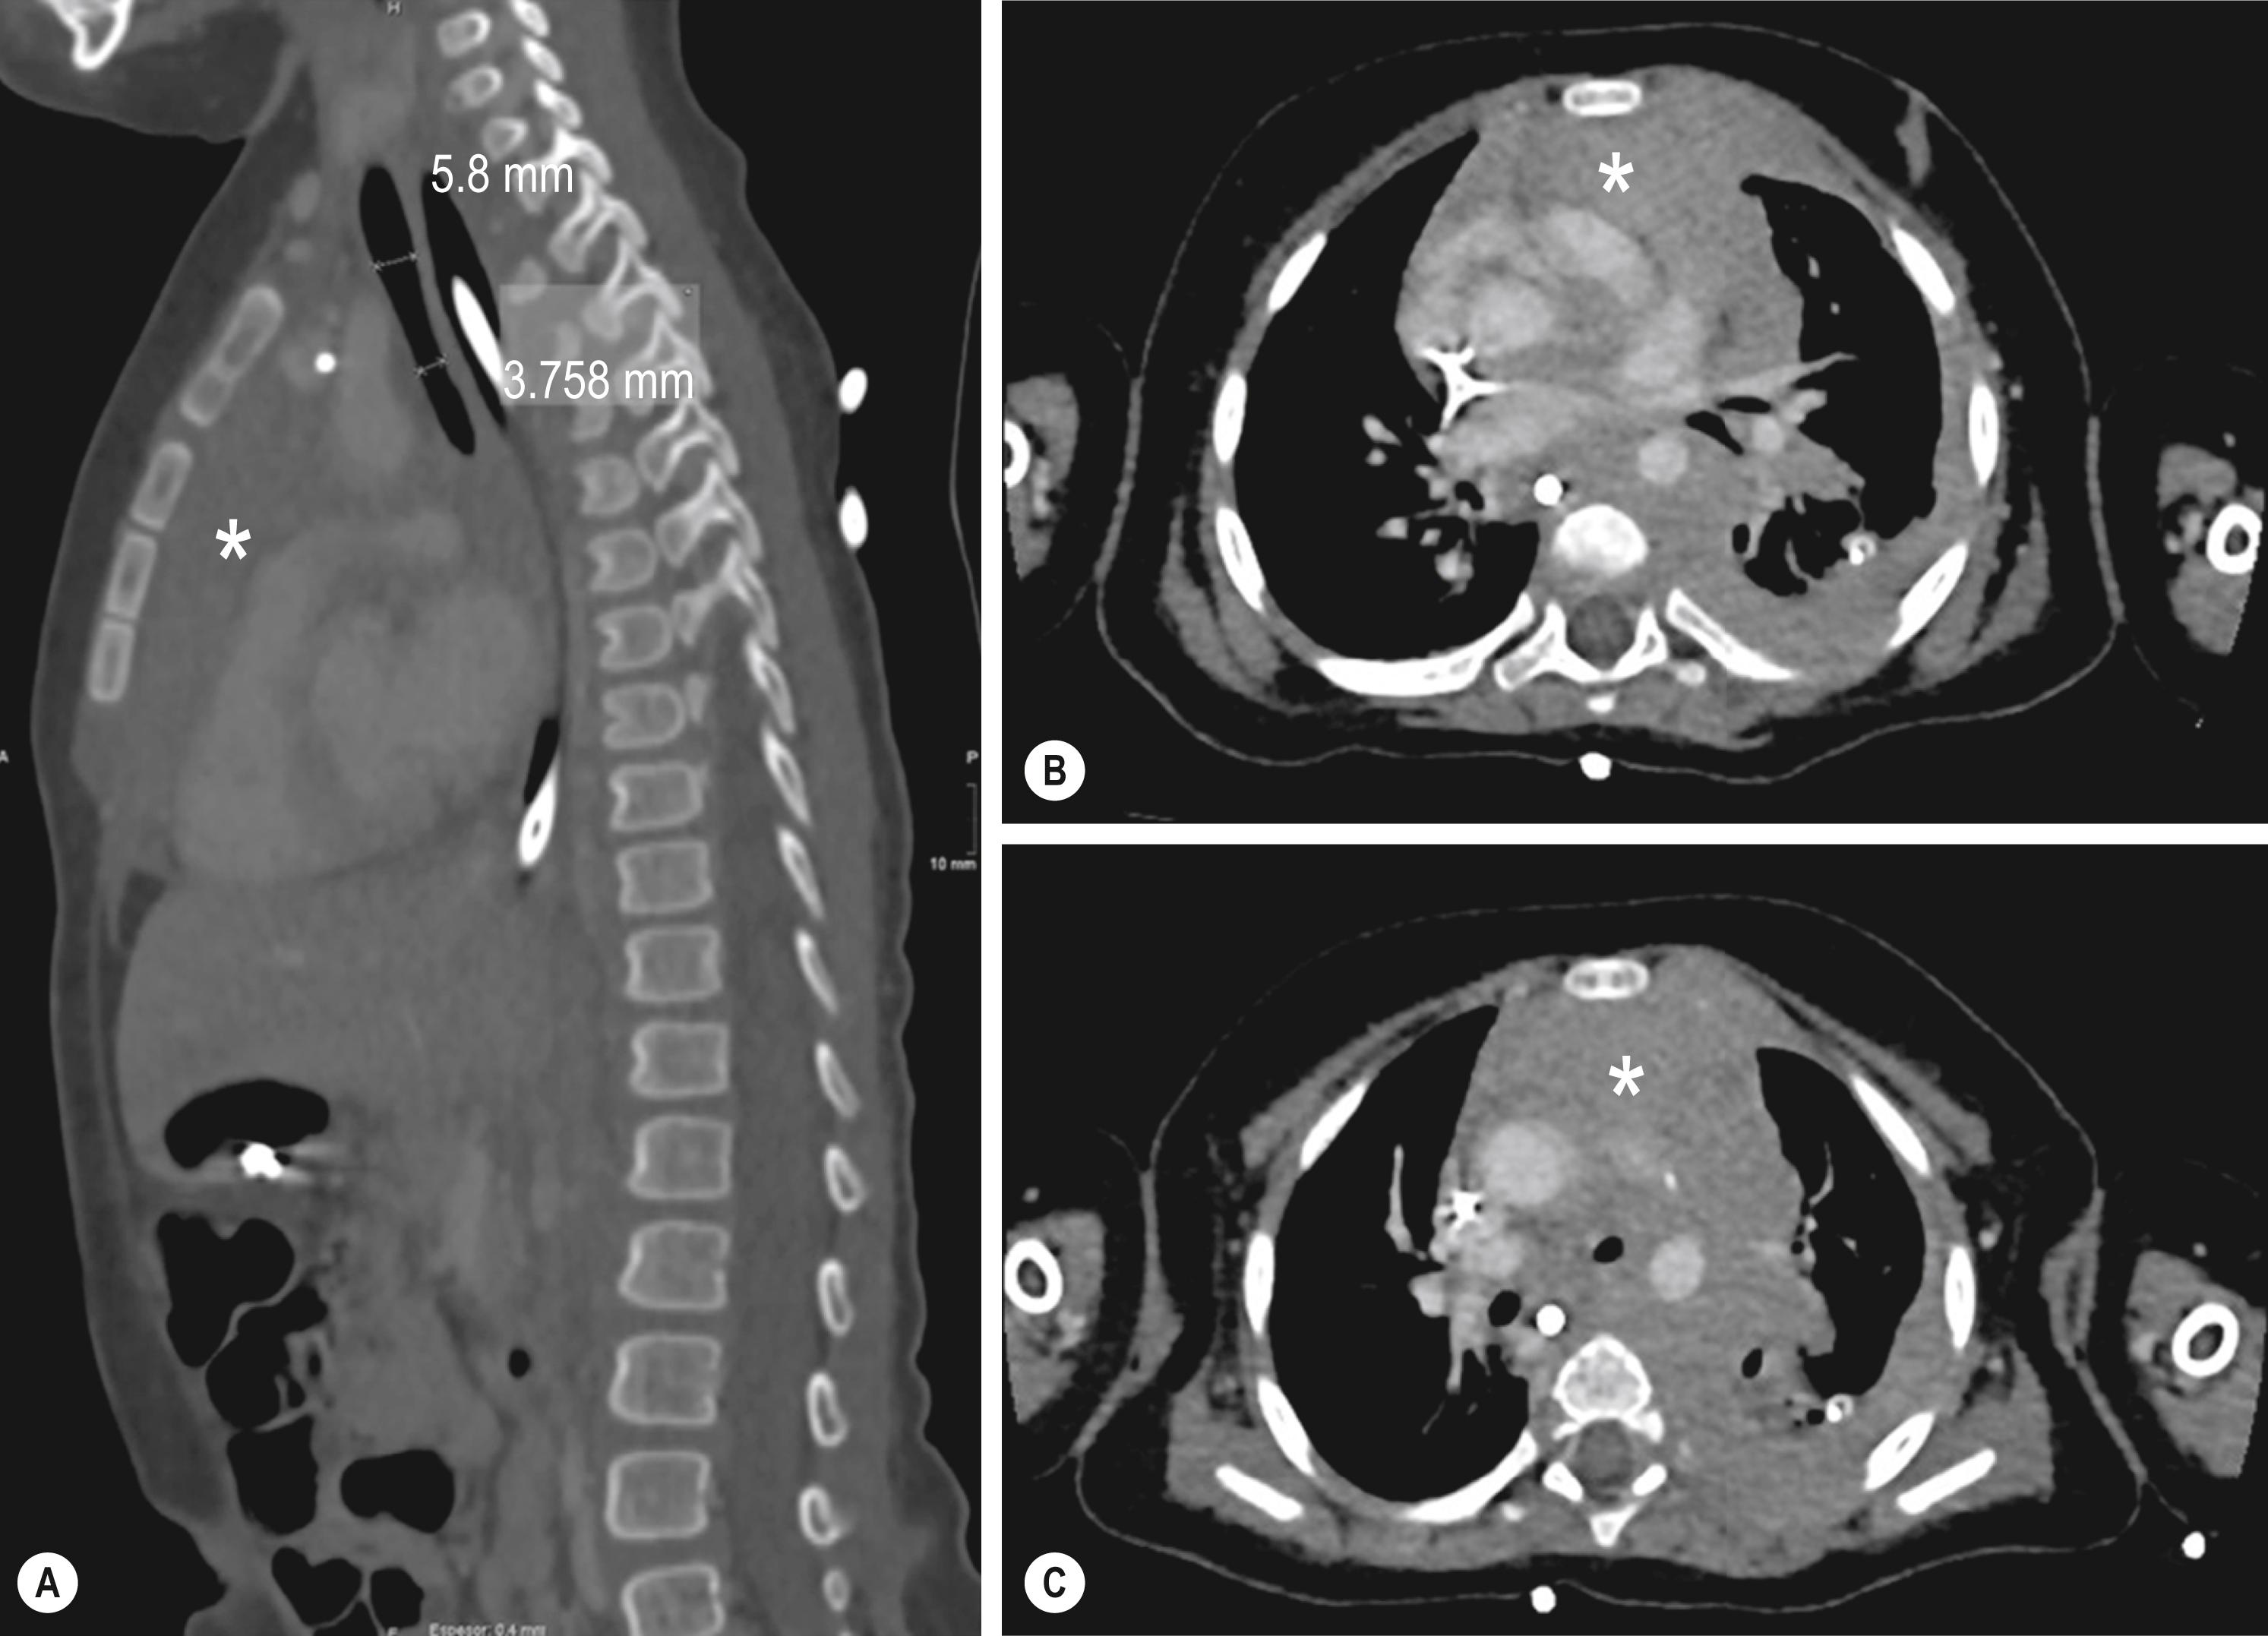 Fig. 25.2, Sagittal (A) and axial (B, C) contrast-enhanced CT images of a 7-year-old girl with a T-cell NHL. Cardiac insufficiency, superior vena cava syndrome, and severe dyspnea were the initial symptoms. The CT scan depicts a large mediastinal mass (asterisks) and a significant pericardial and pleural effusion. Diagnosis was made by cytometry analysis from the pericardial fluid.